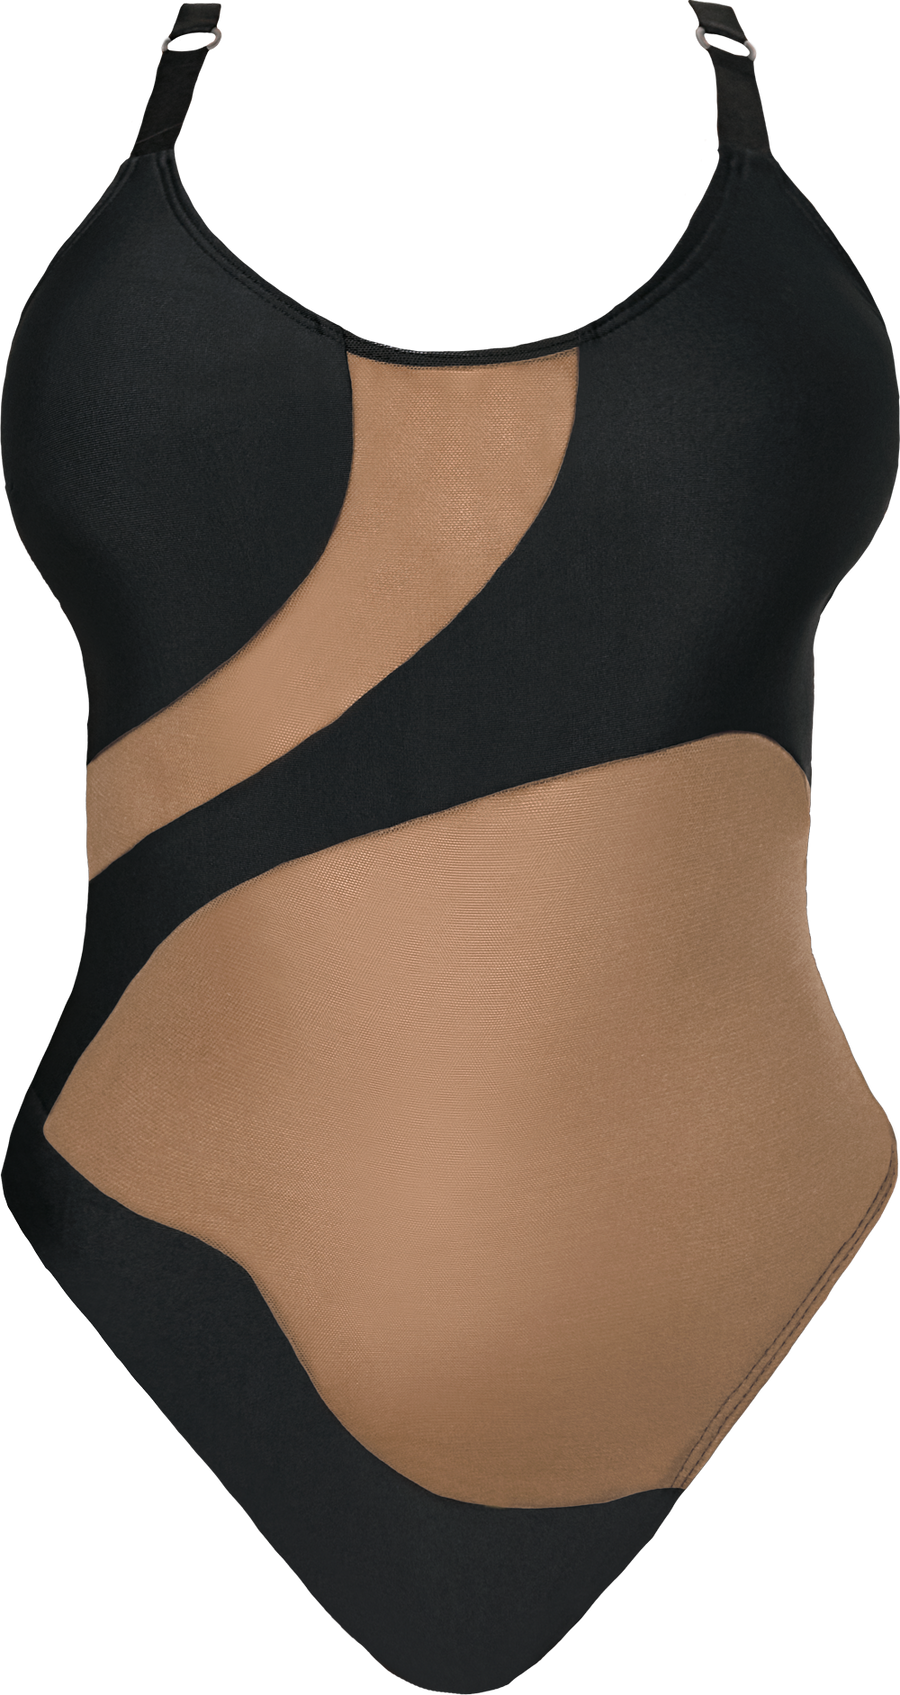 Silhouette One-Piece Body Suit Black with Cream Mesh